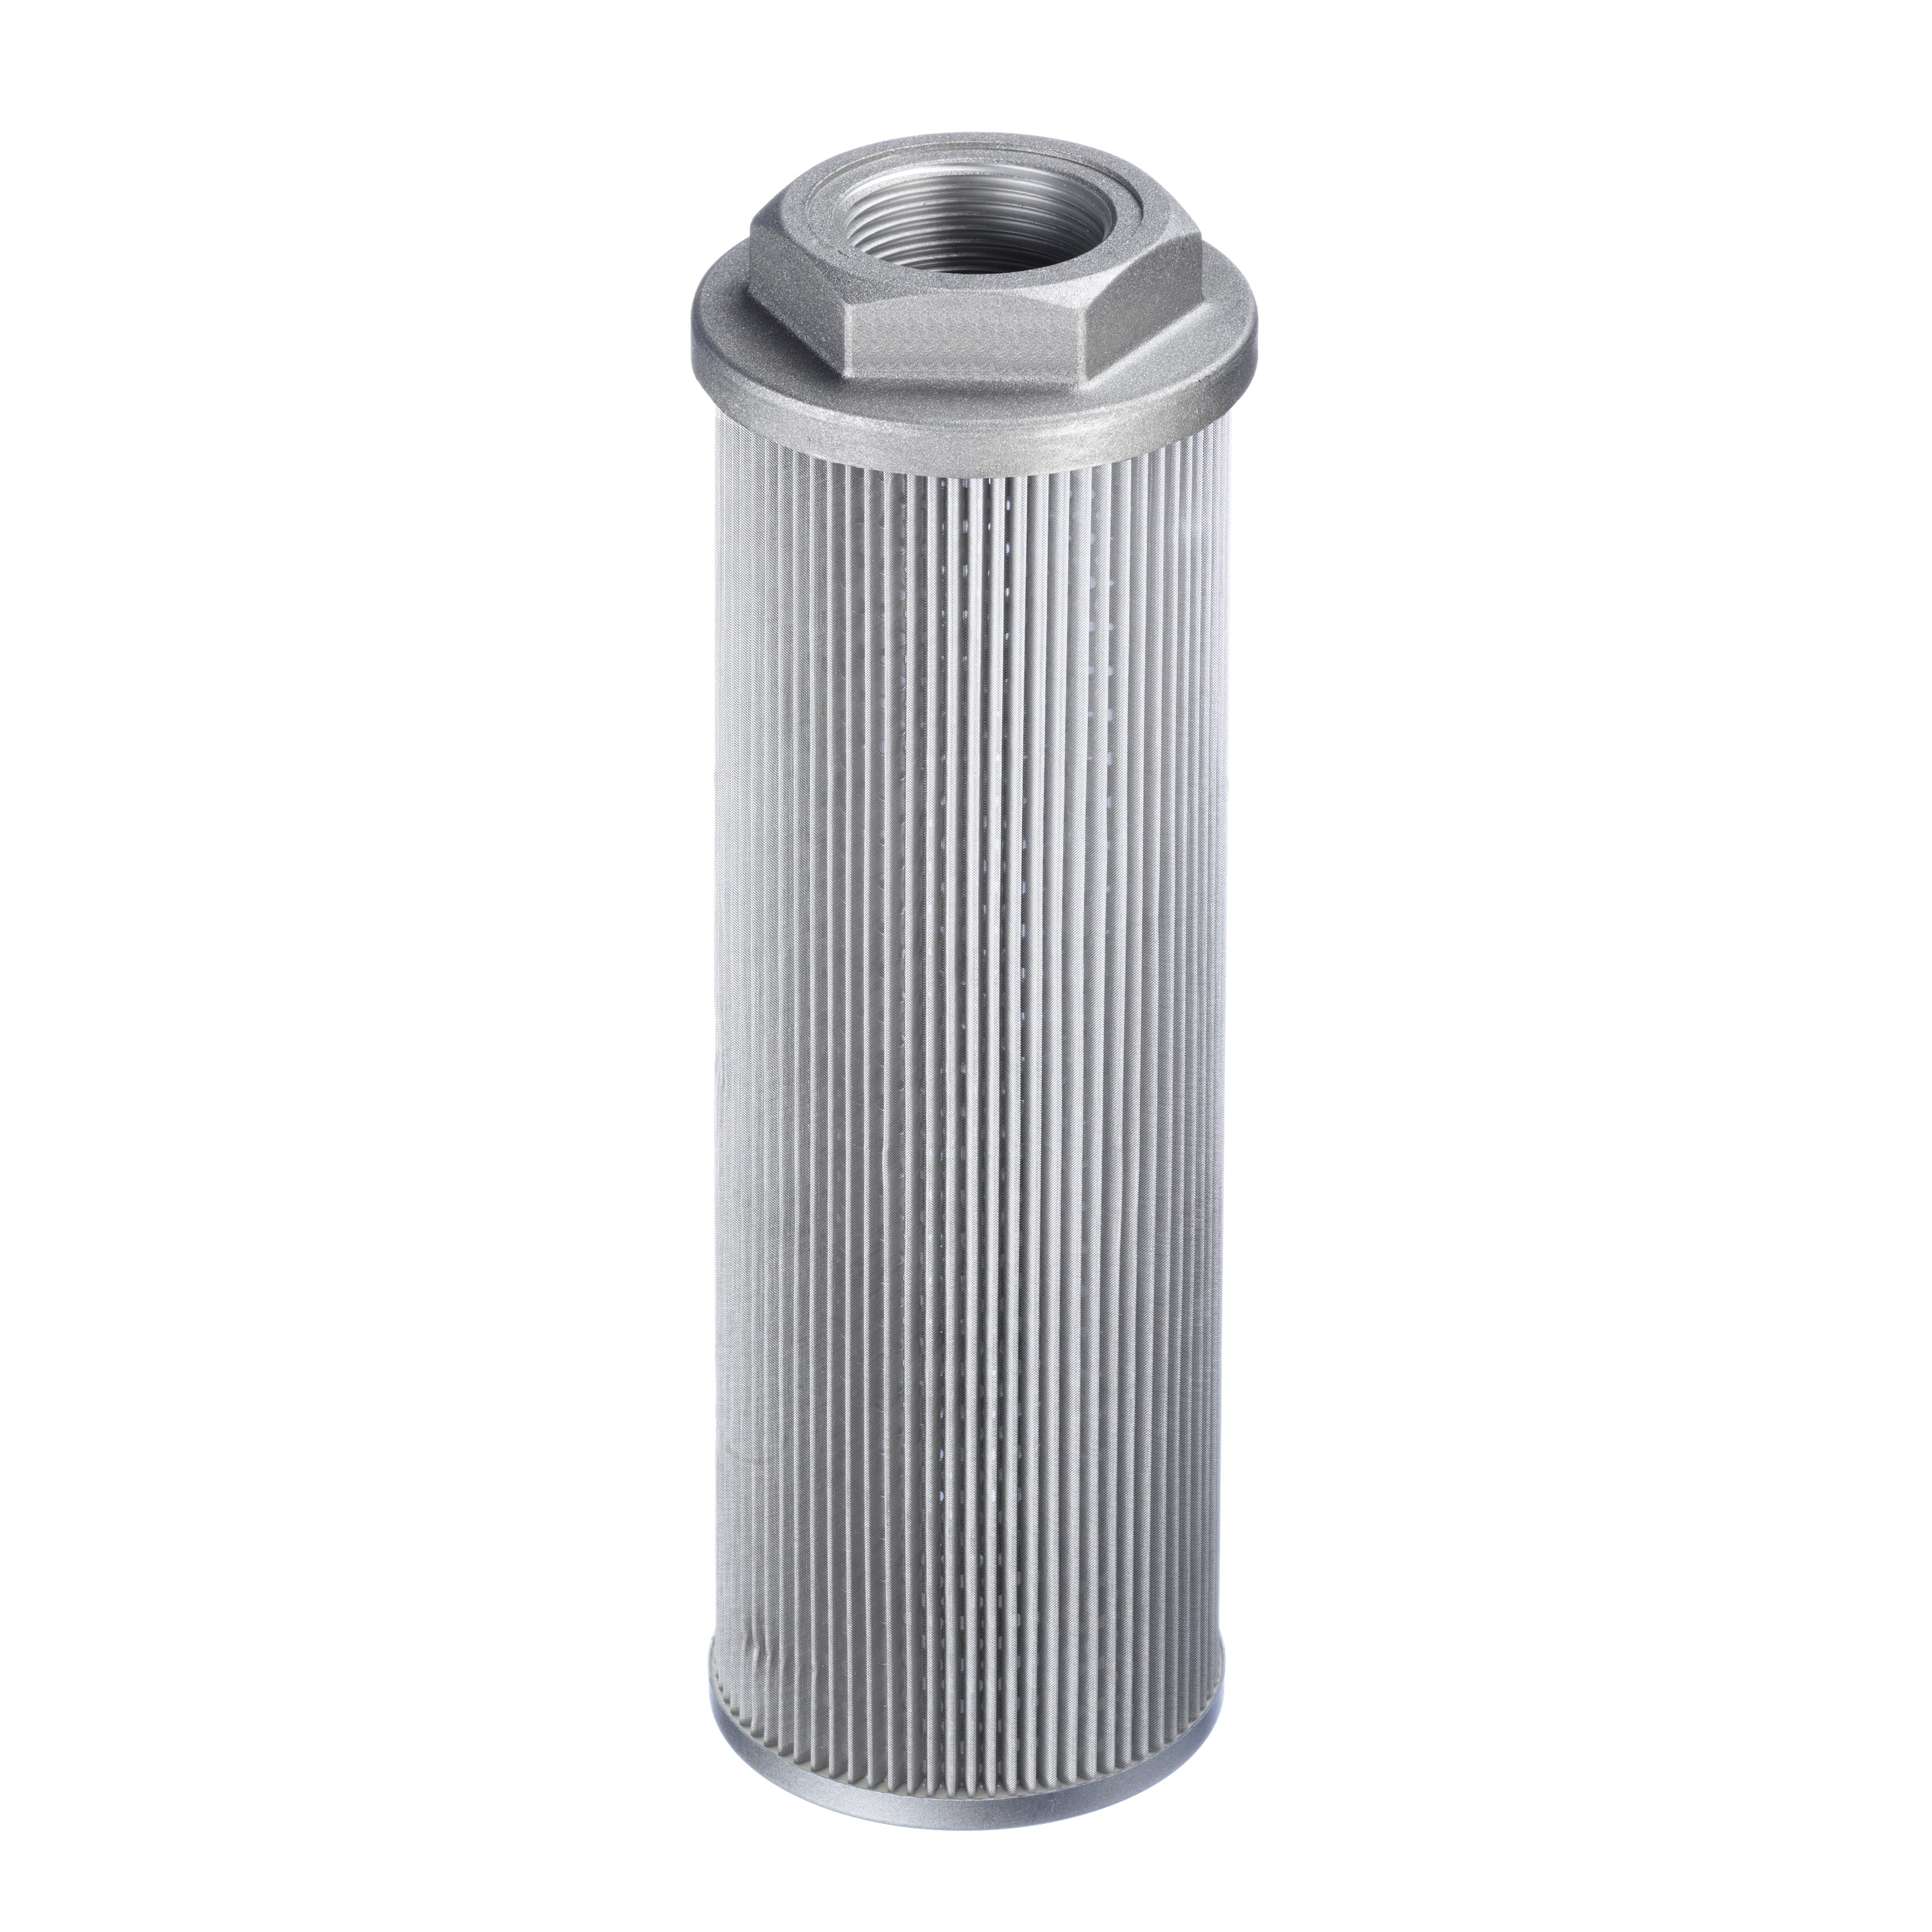 SUS-088-N20-195-125-A-O : Stauff Suction Strainer, Aluminum End Cap, 1.25" NPT, 16.9GPM, 125 Micron, No Bypass